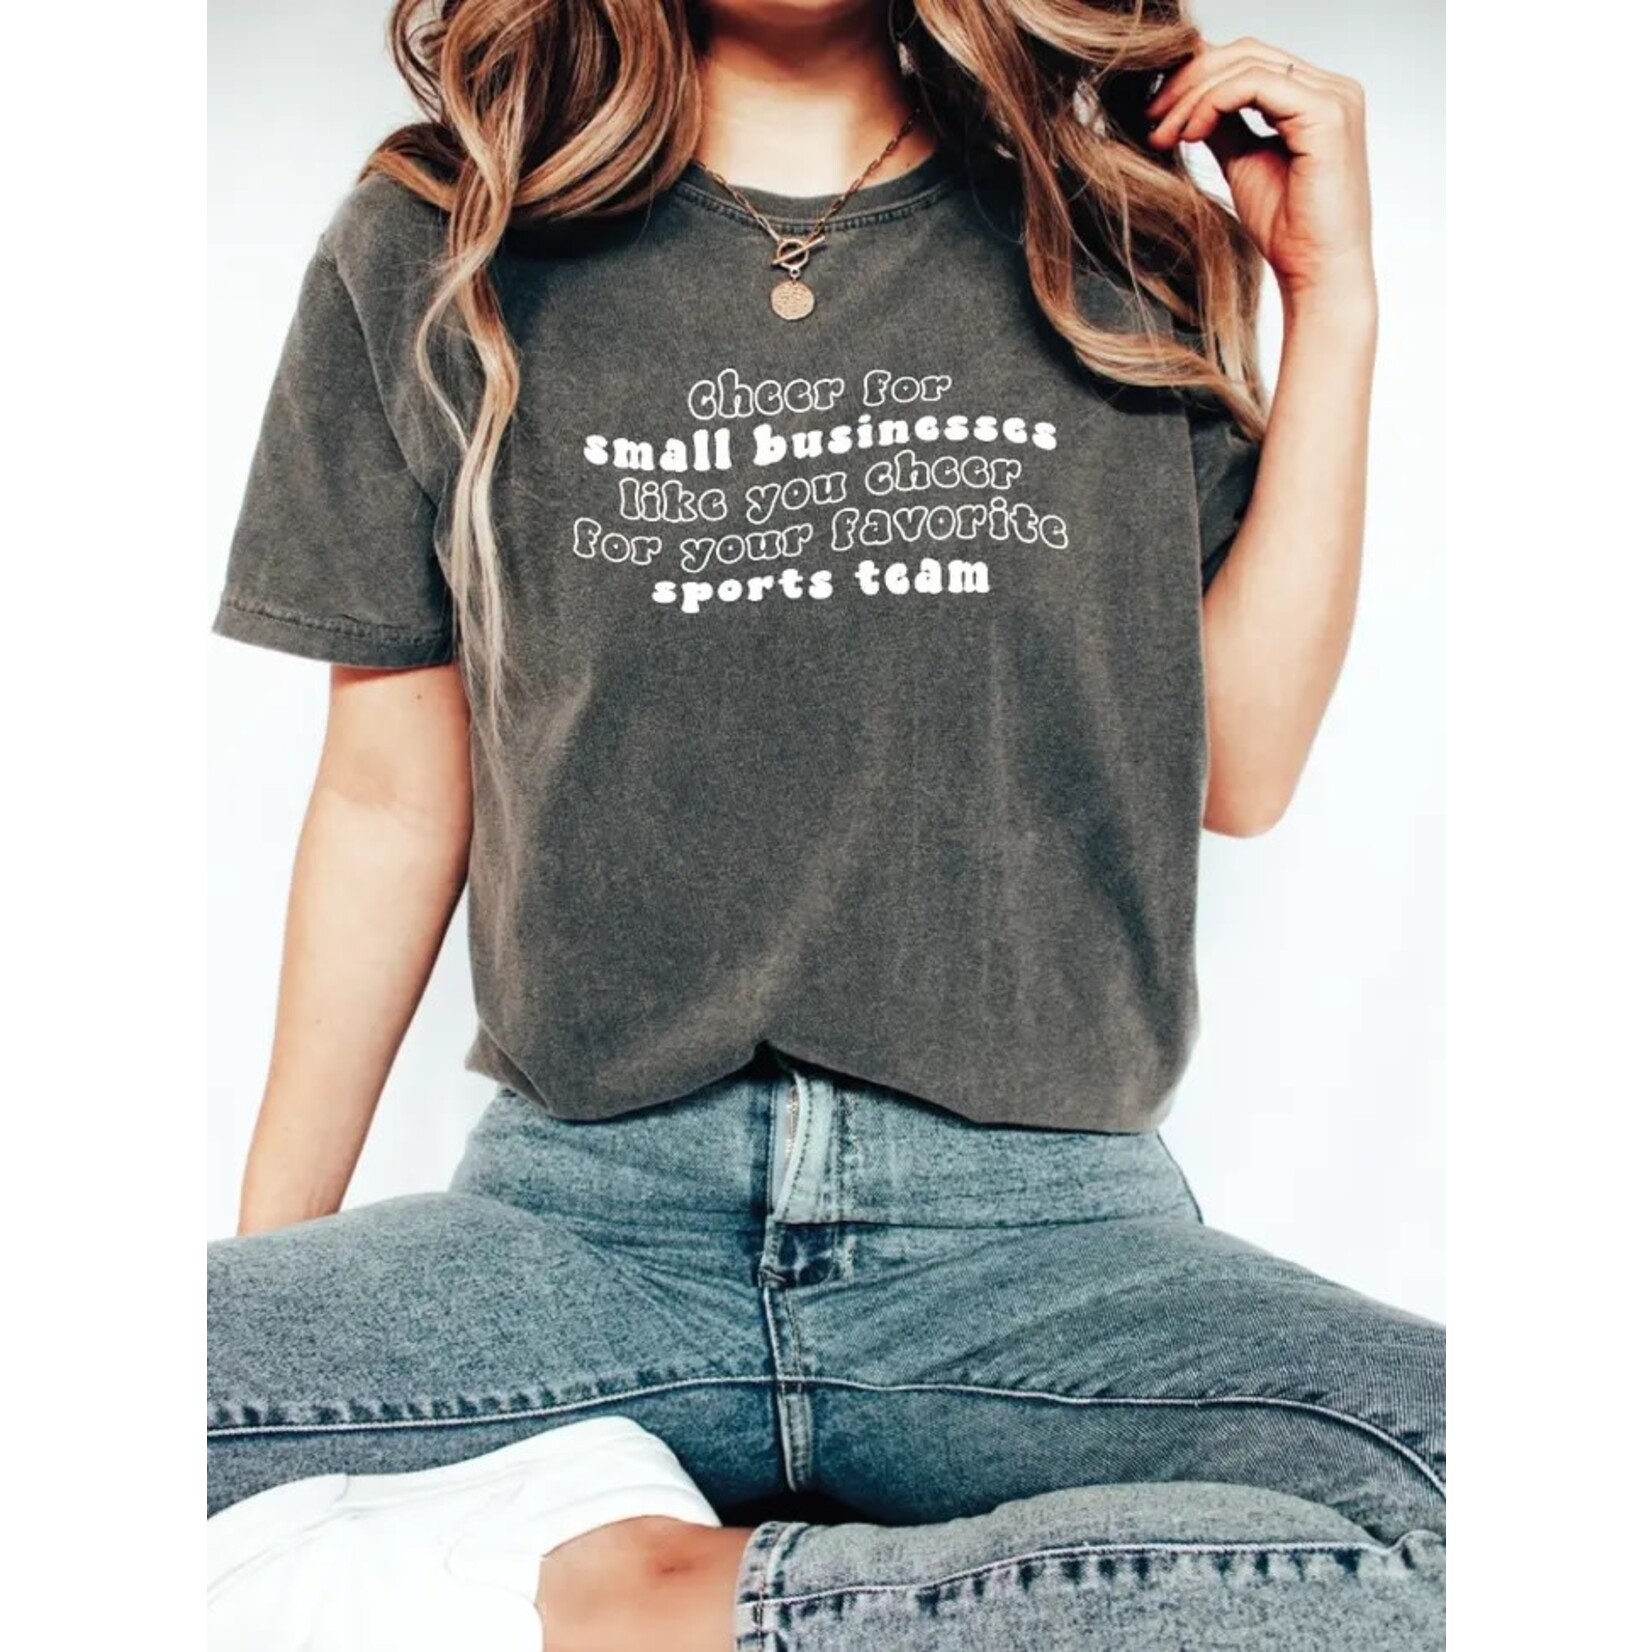 Saved By Grace Co. Cheer for Small Businesses Tee - Medium